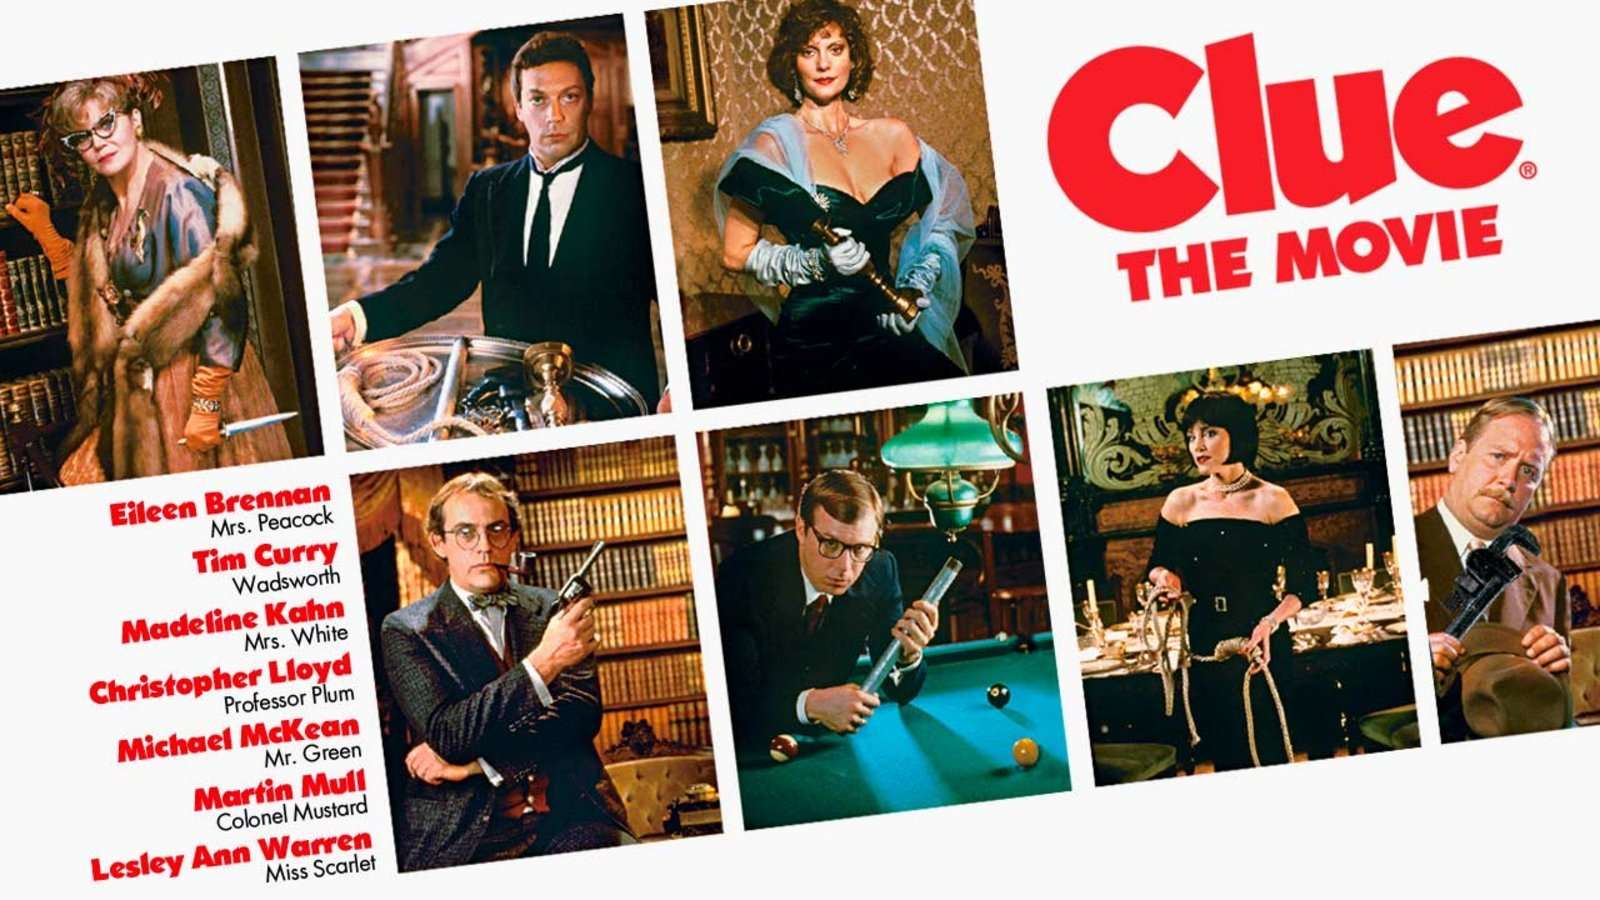 It's a Mystery in Clue (1985):